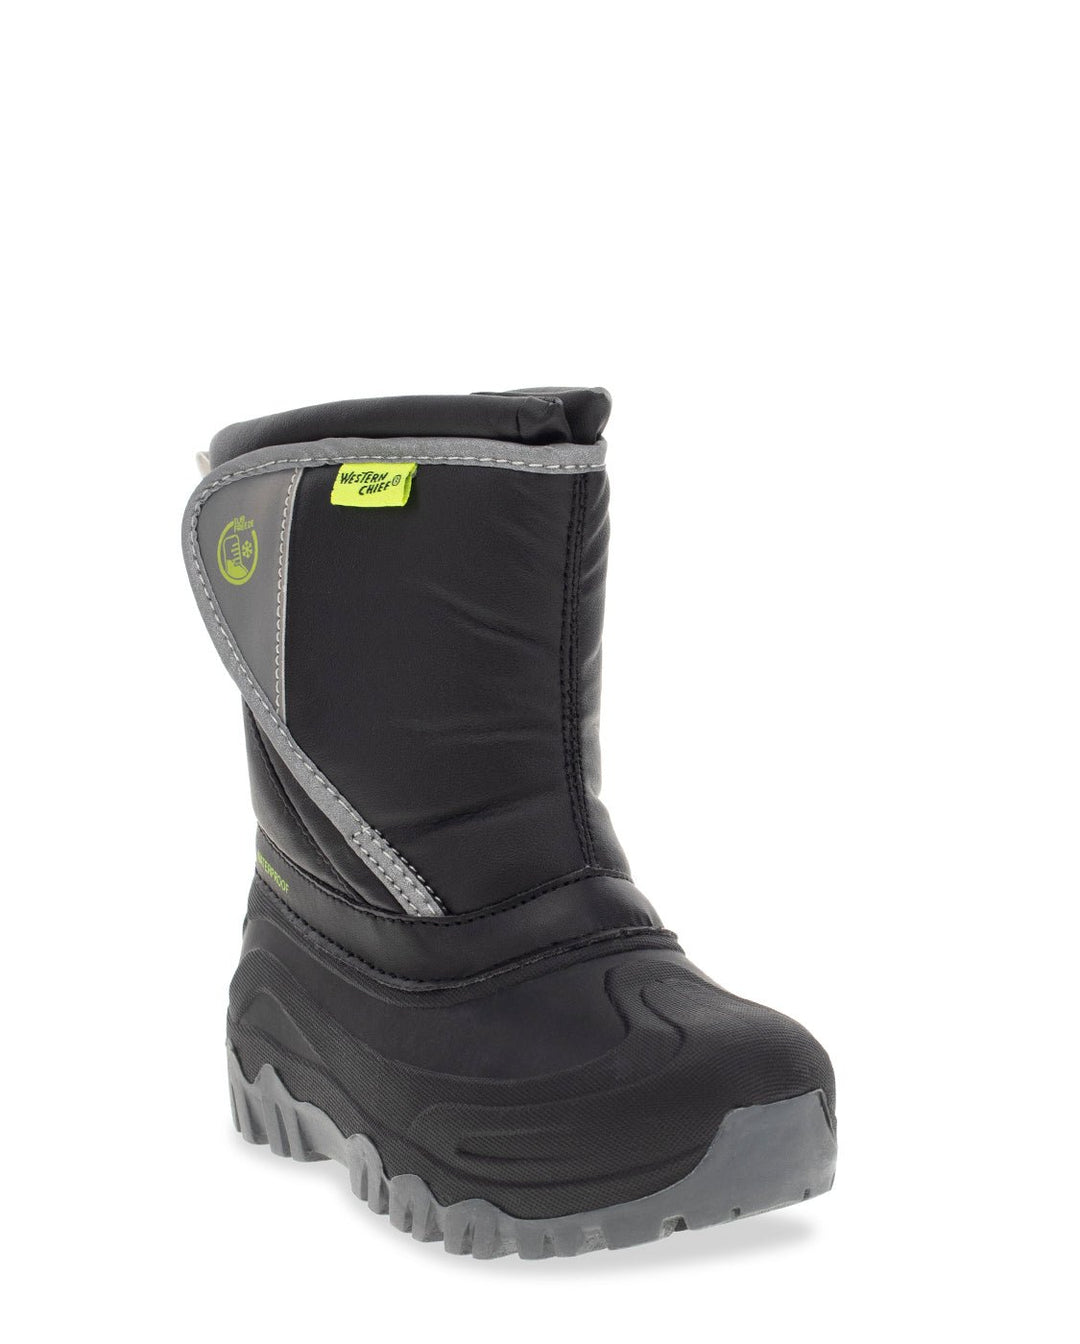 Kids Selah Cold Weather Boot - Black - Western Chief